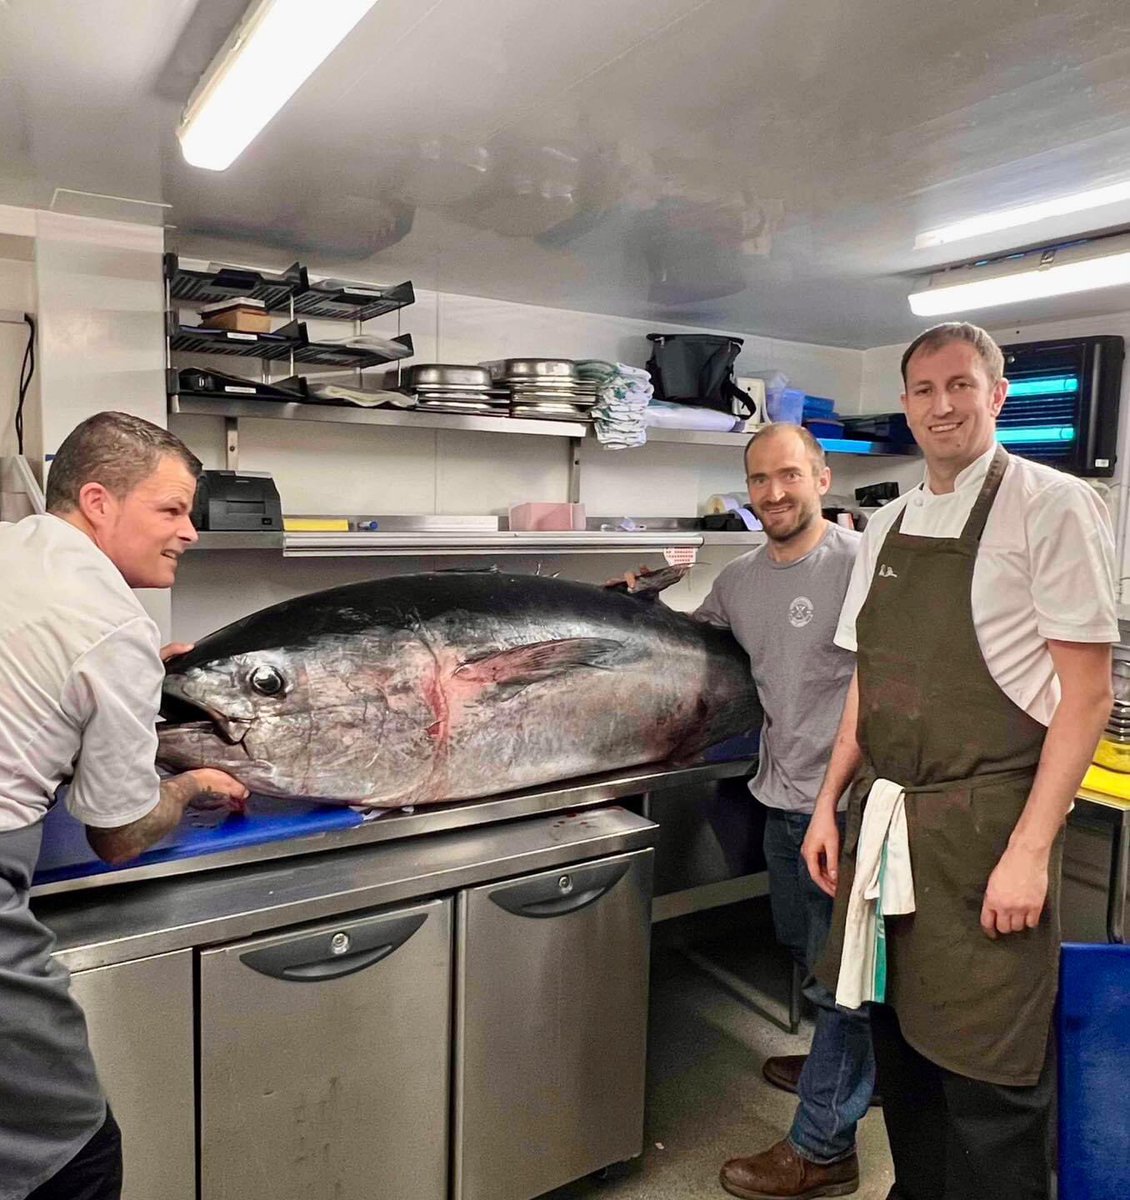 Bluefin Tuna are back in Cornish waters after a 70-year absence. But why are fishermen being licensed to catch these incredible fish Also what is Rick Stein thinking promoting the catch of this rare 150kg specimen to feed to tourists in his hugely expensive Padstow restaurant…